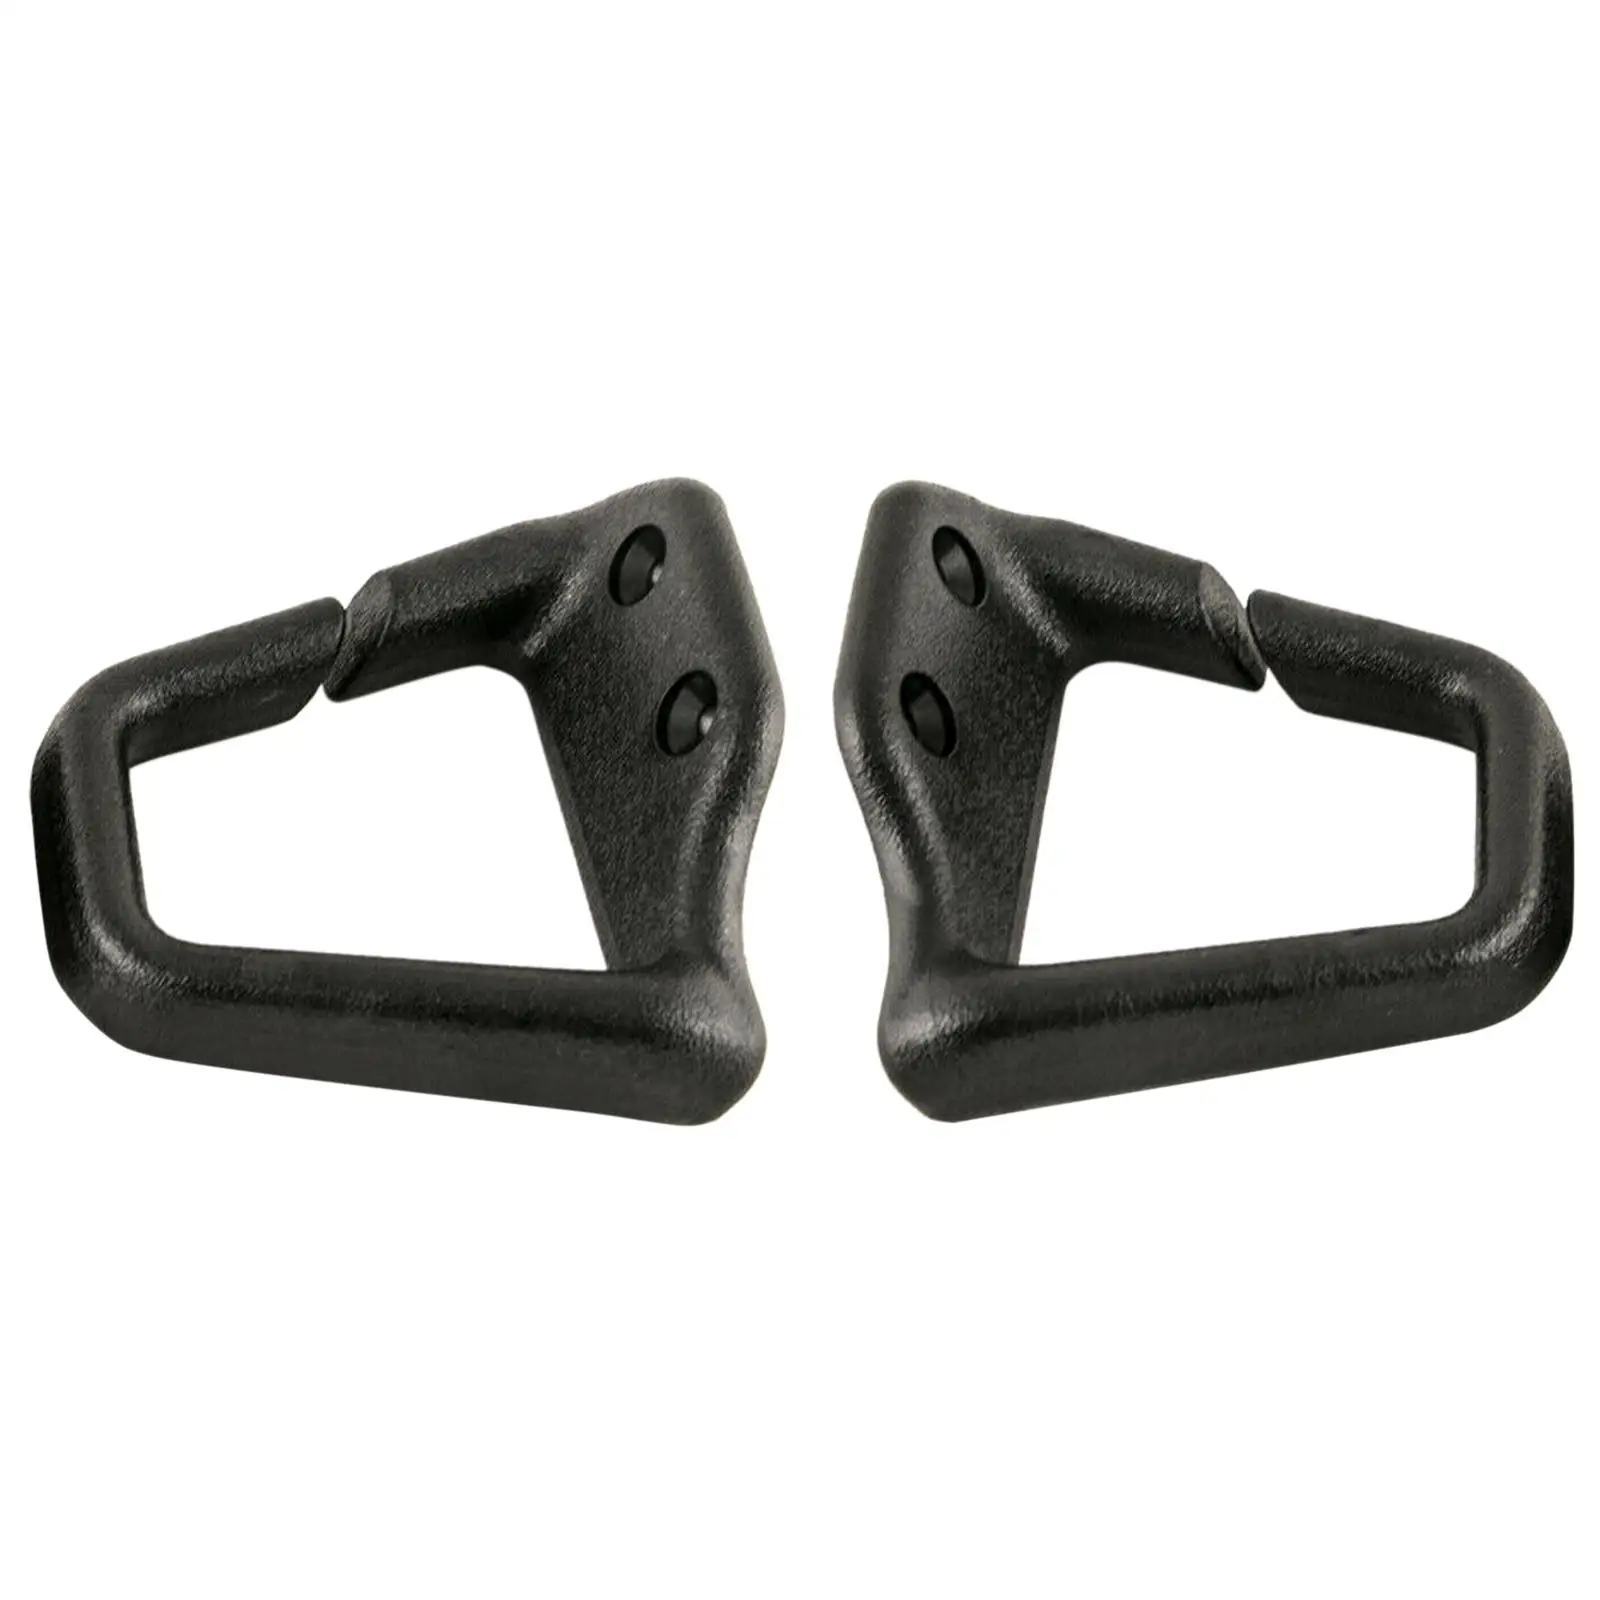 2x 2Pcs  Belt Guide Clips Buckle Stopper Black  Guide Loops for   93-02 HT7203 HT7202 16817202 16817203